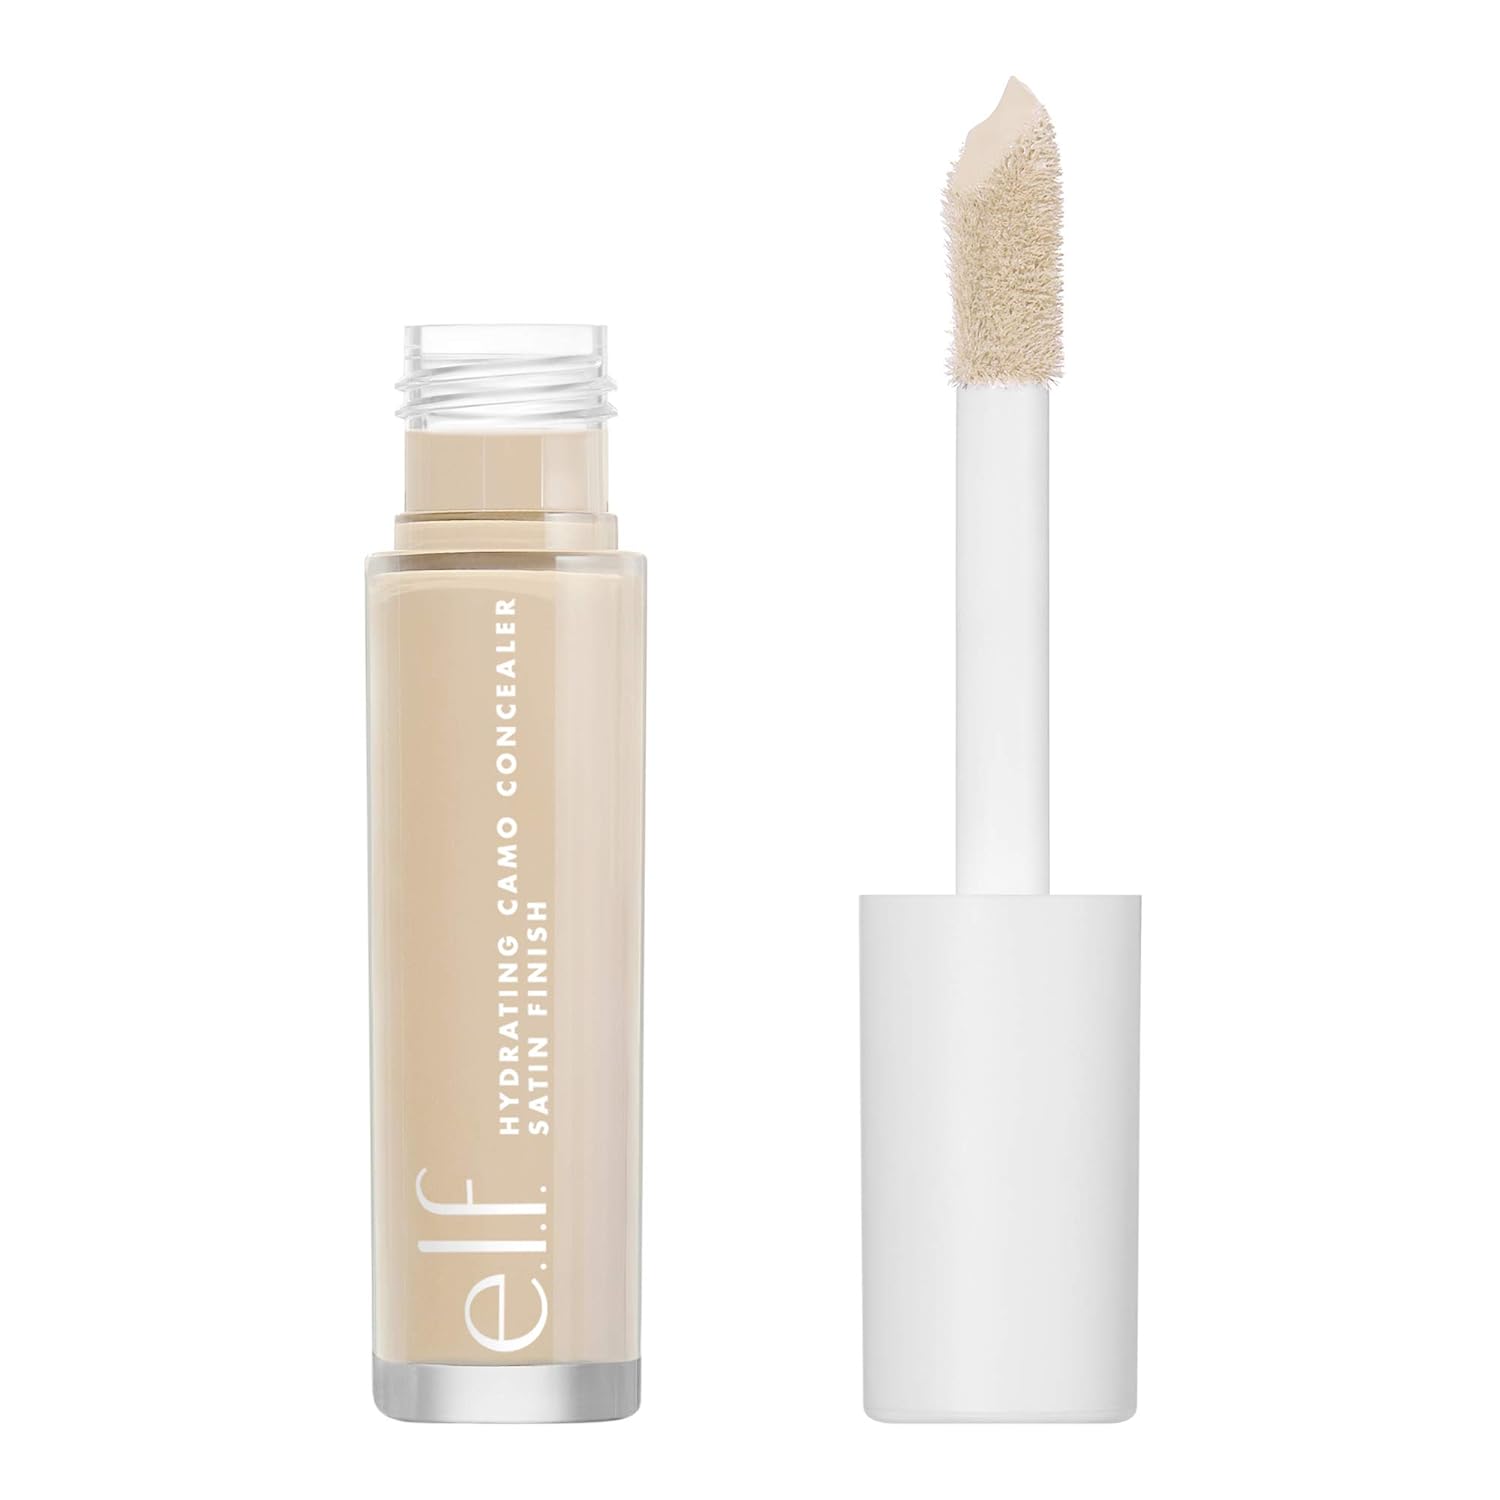 e.l.f., Hydrating Camo Concealer, Lightweight, Full Coverage, Long Lasting, Conceals, Corrects, Covers, Hydrates, Highlights, Light Ivory, Satin Finish, 25 Shades, All-Day Wear, 0.20